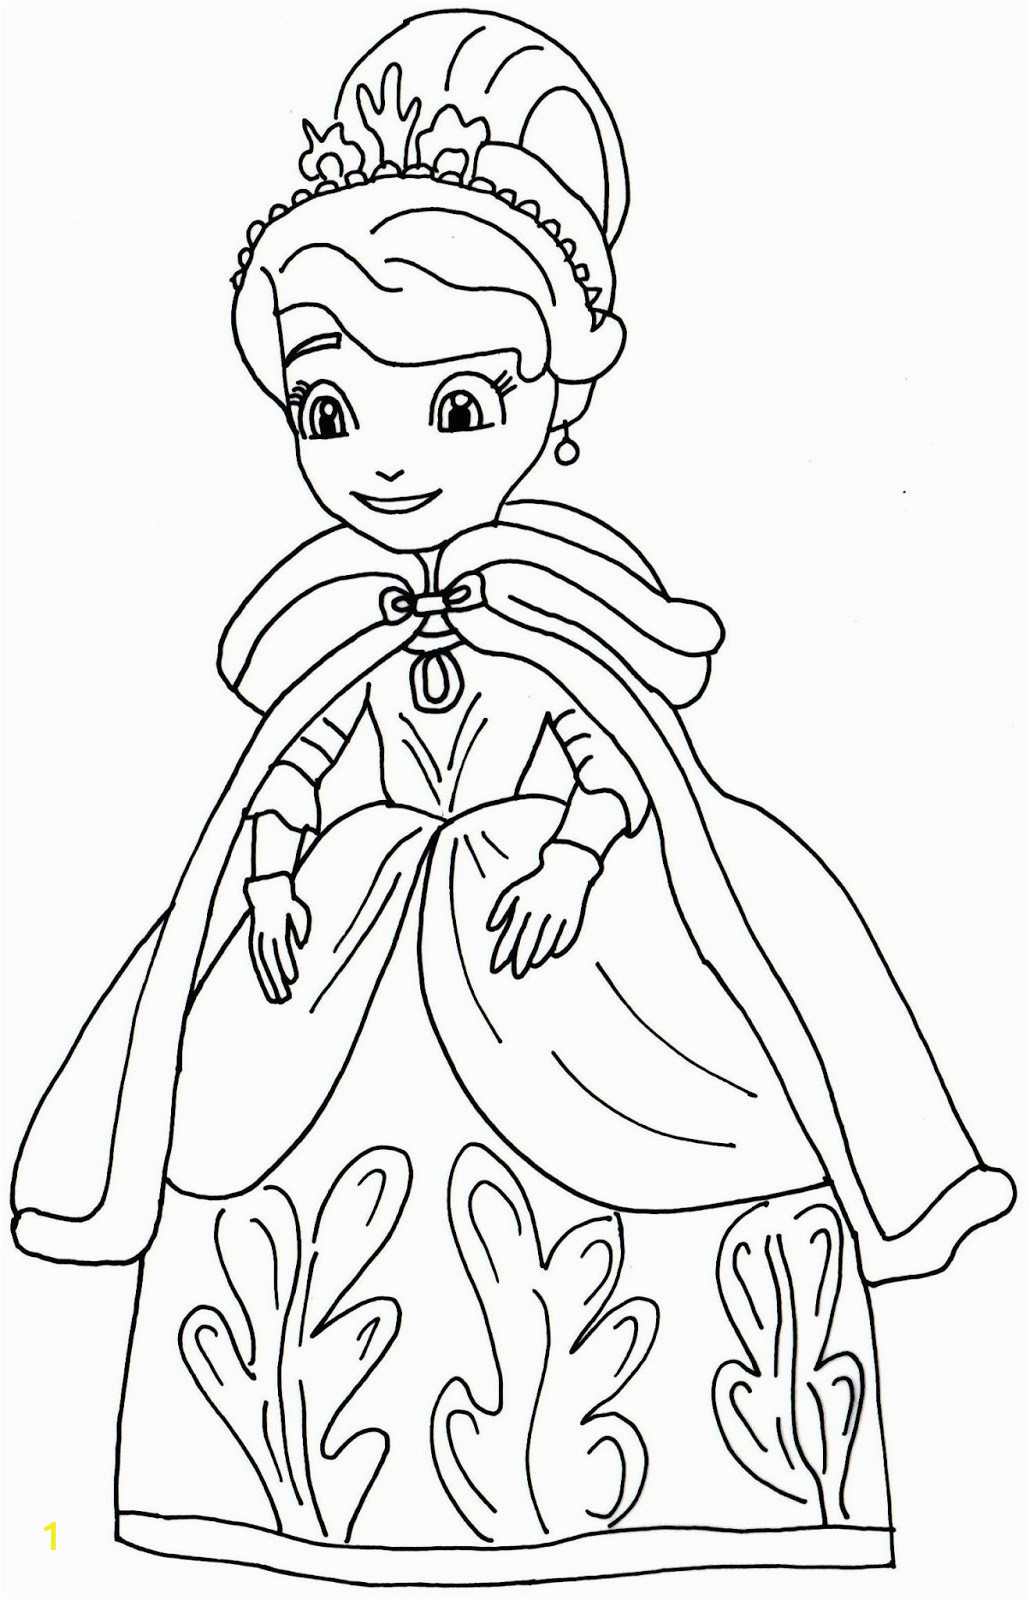 44 coloring pages of sofia the first